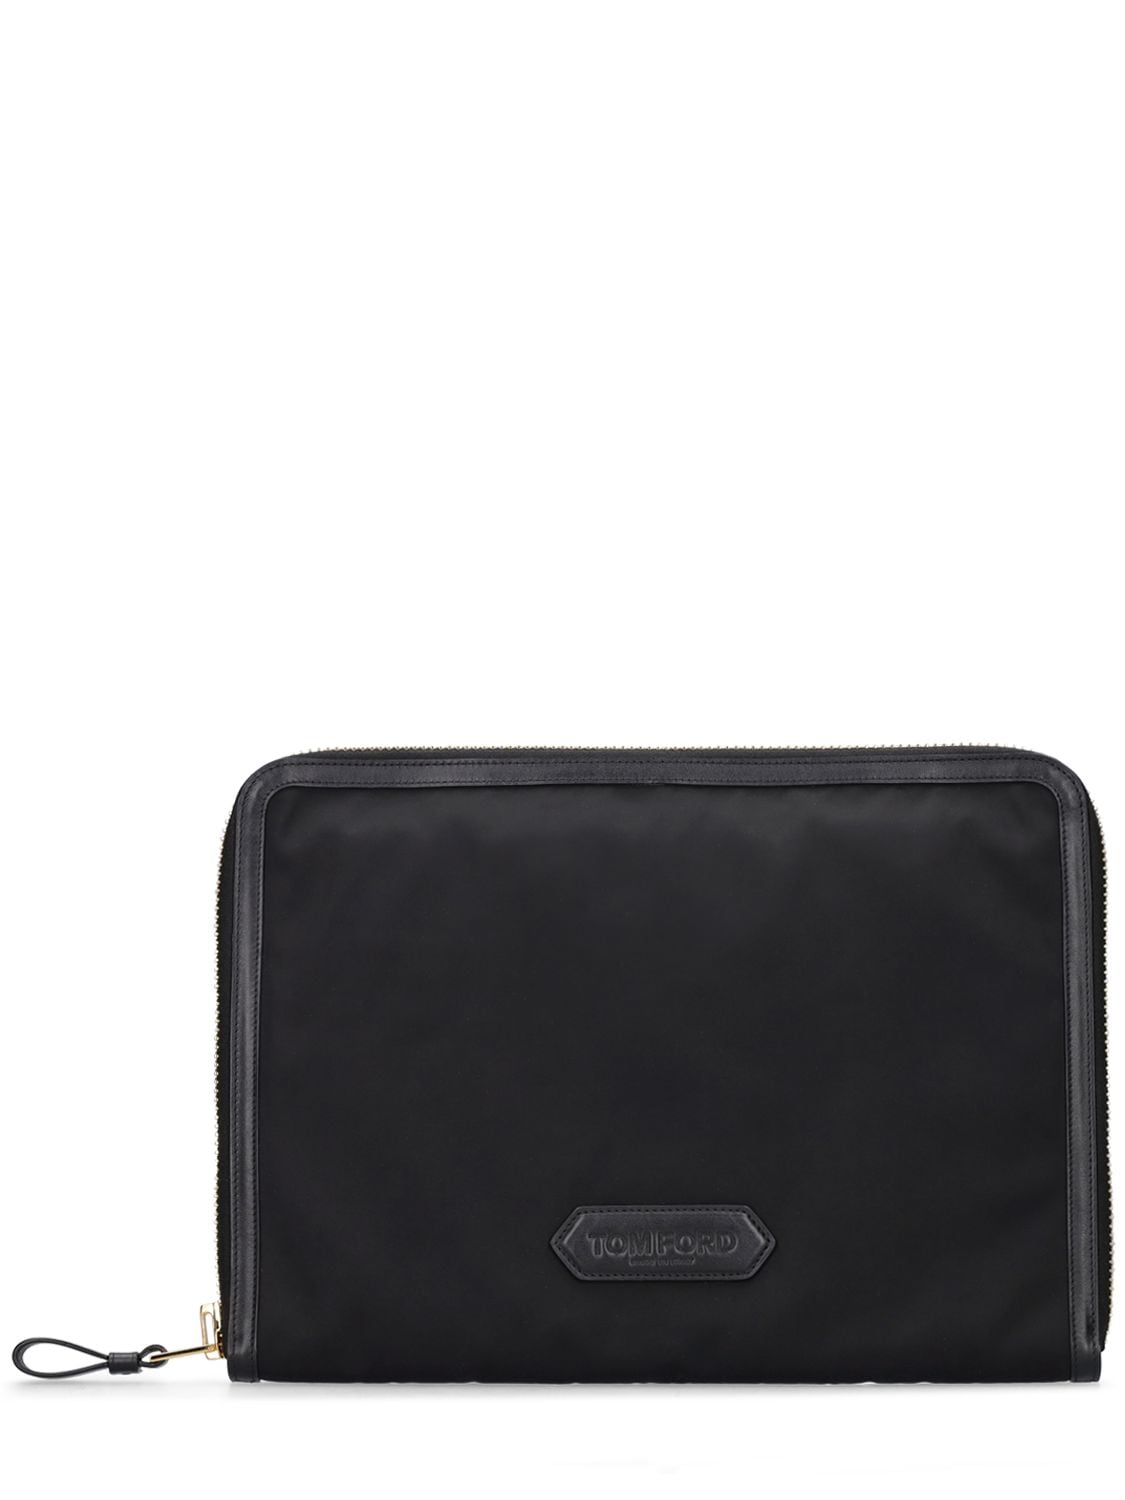 Image of Tom Ford Logo Zip Around Pouch